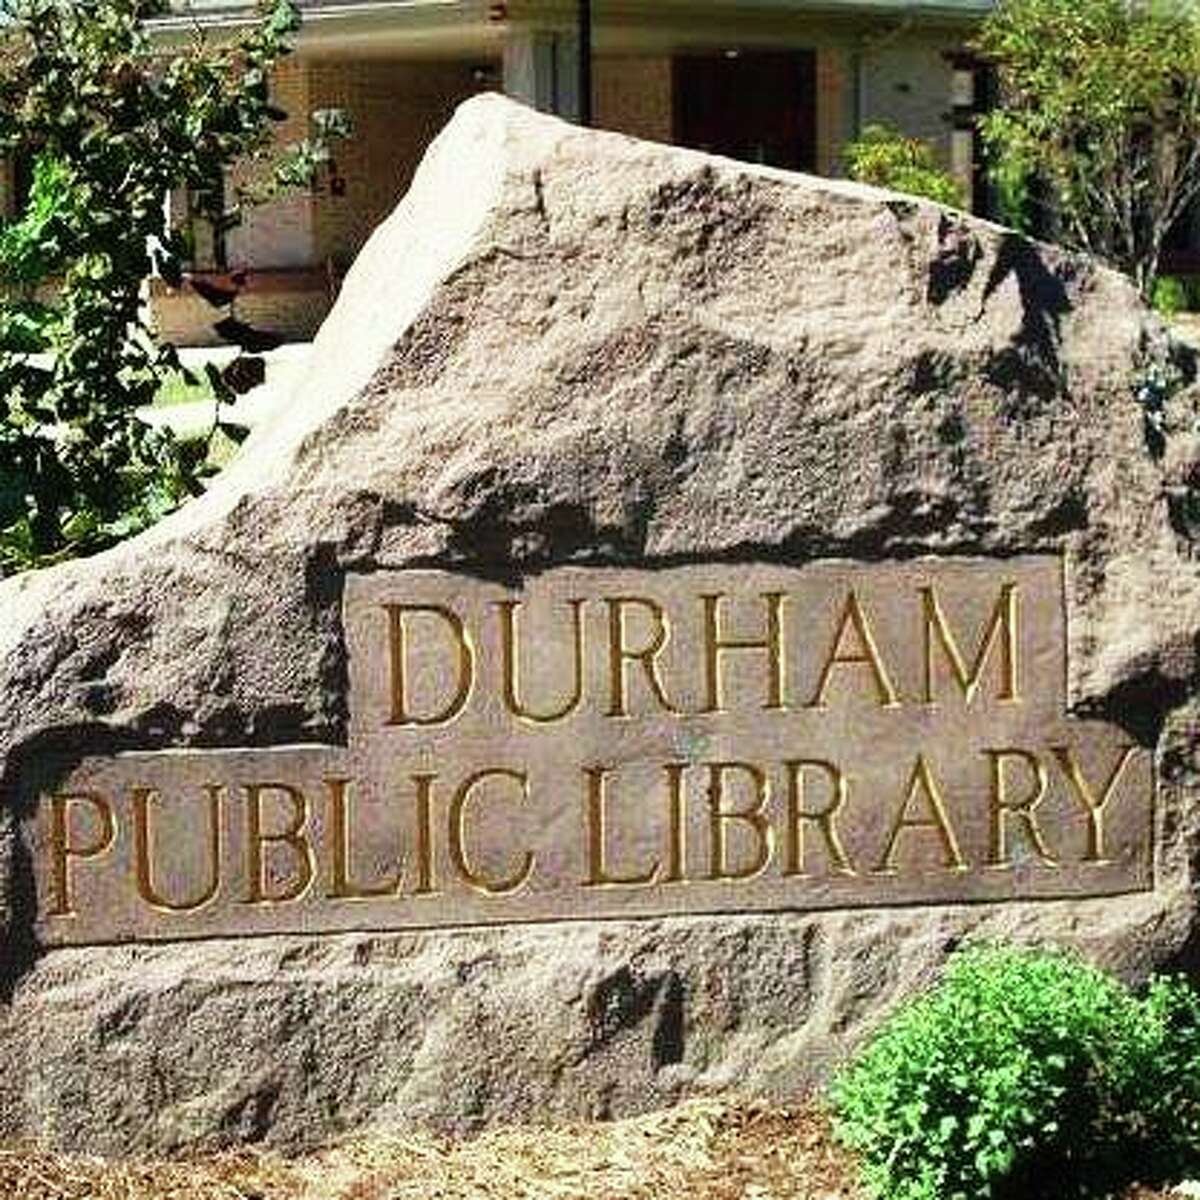 The Durham Library is located at  7 Maple Ave.